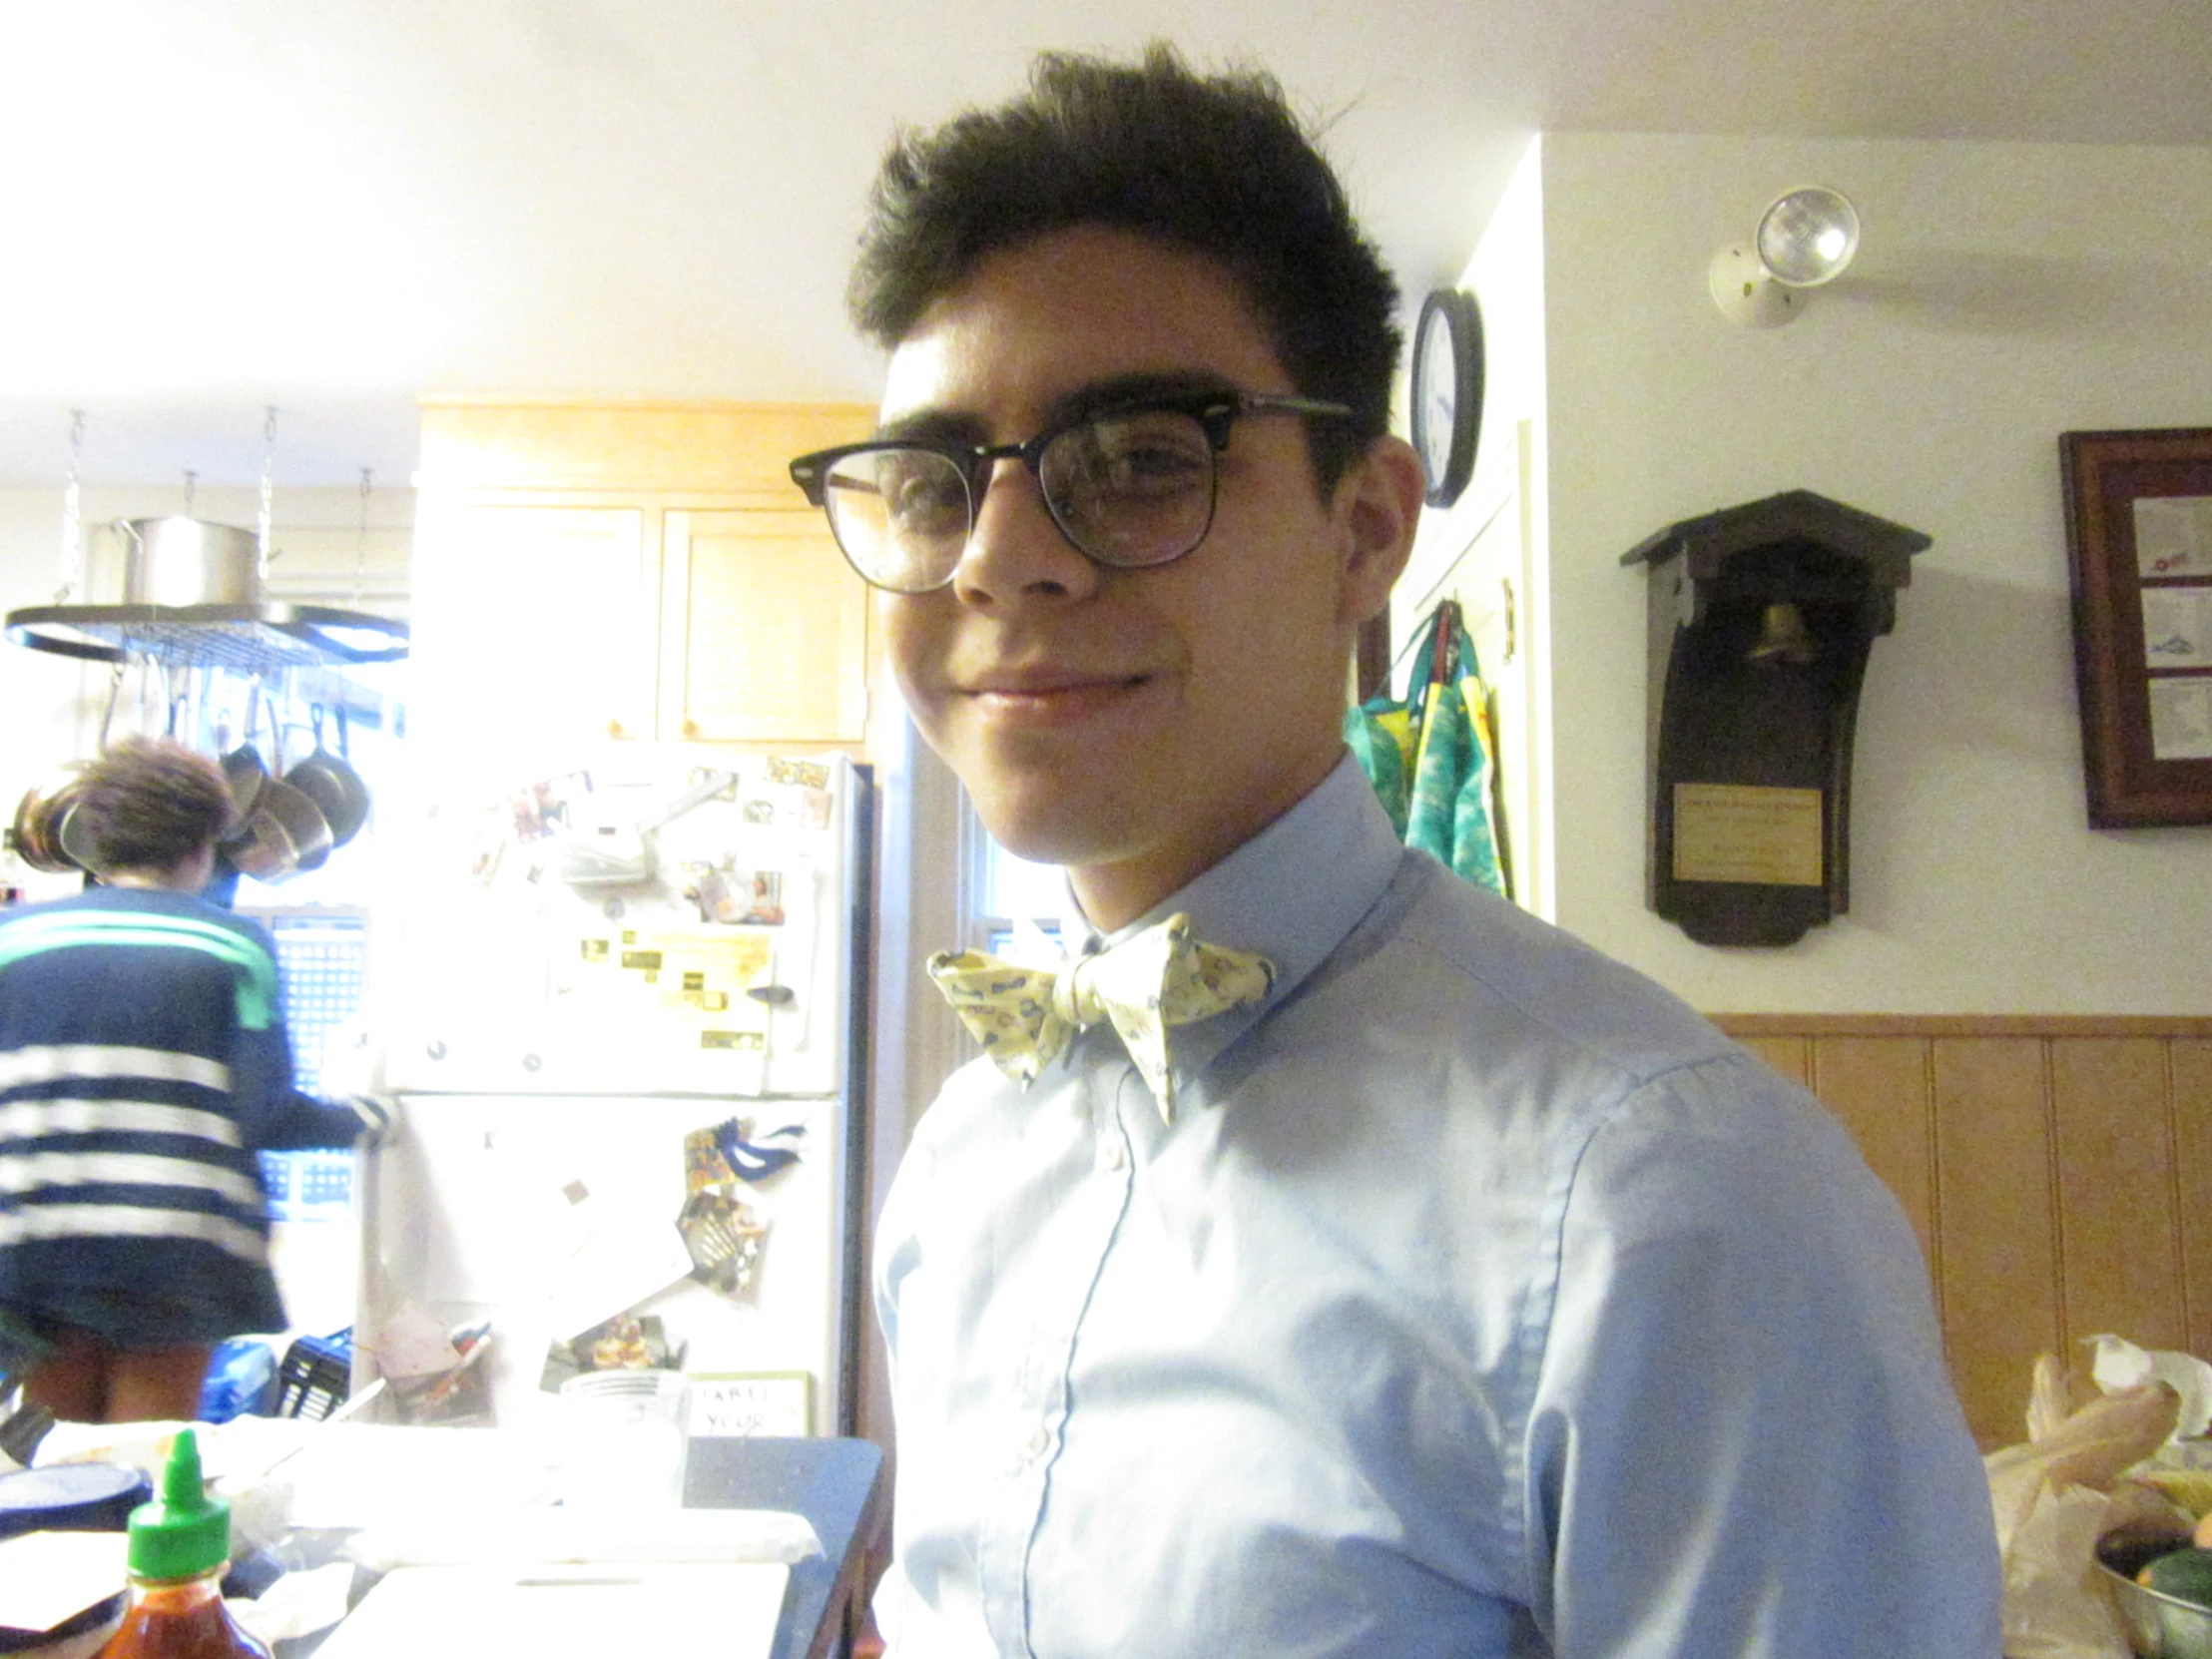 the young man is wearing glasses and a bow tie